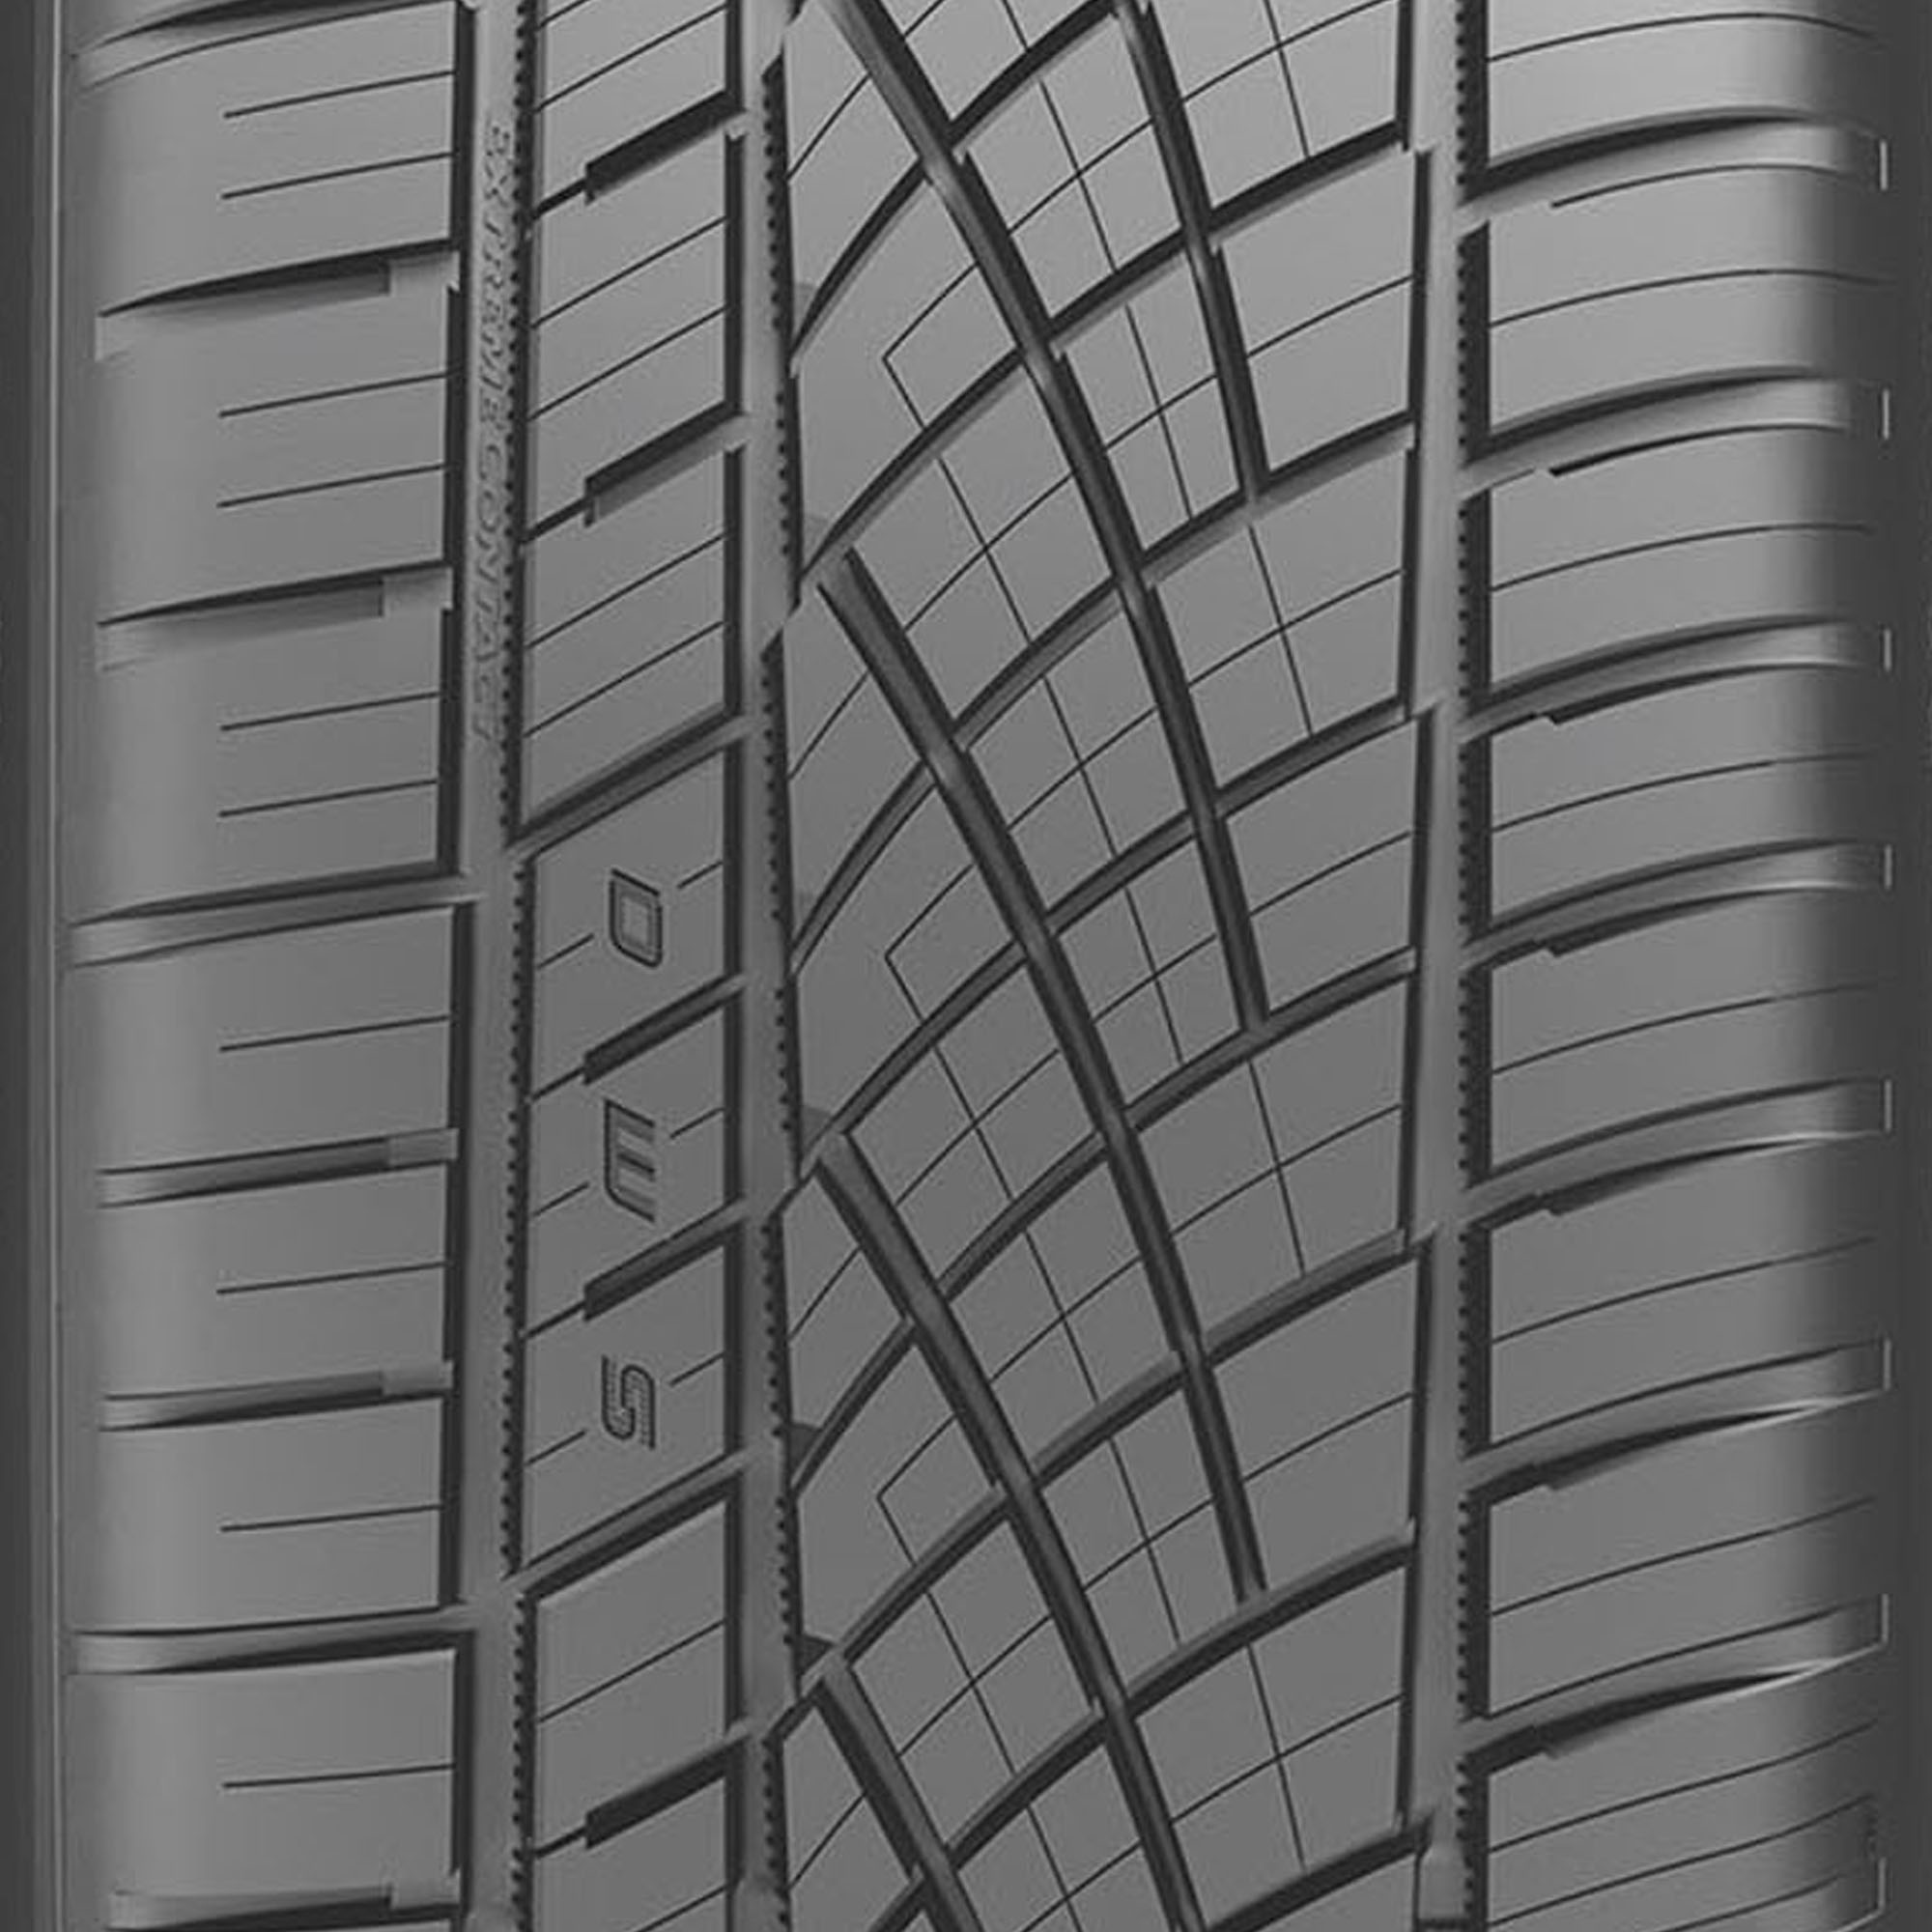 Continental ExtremeContact DWS06 PLUS All Season 275/35ZR20 102Y XL Passenger Tire - image 4 of 6